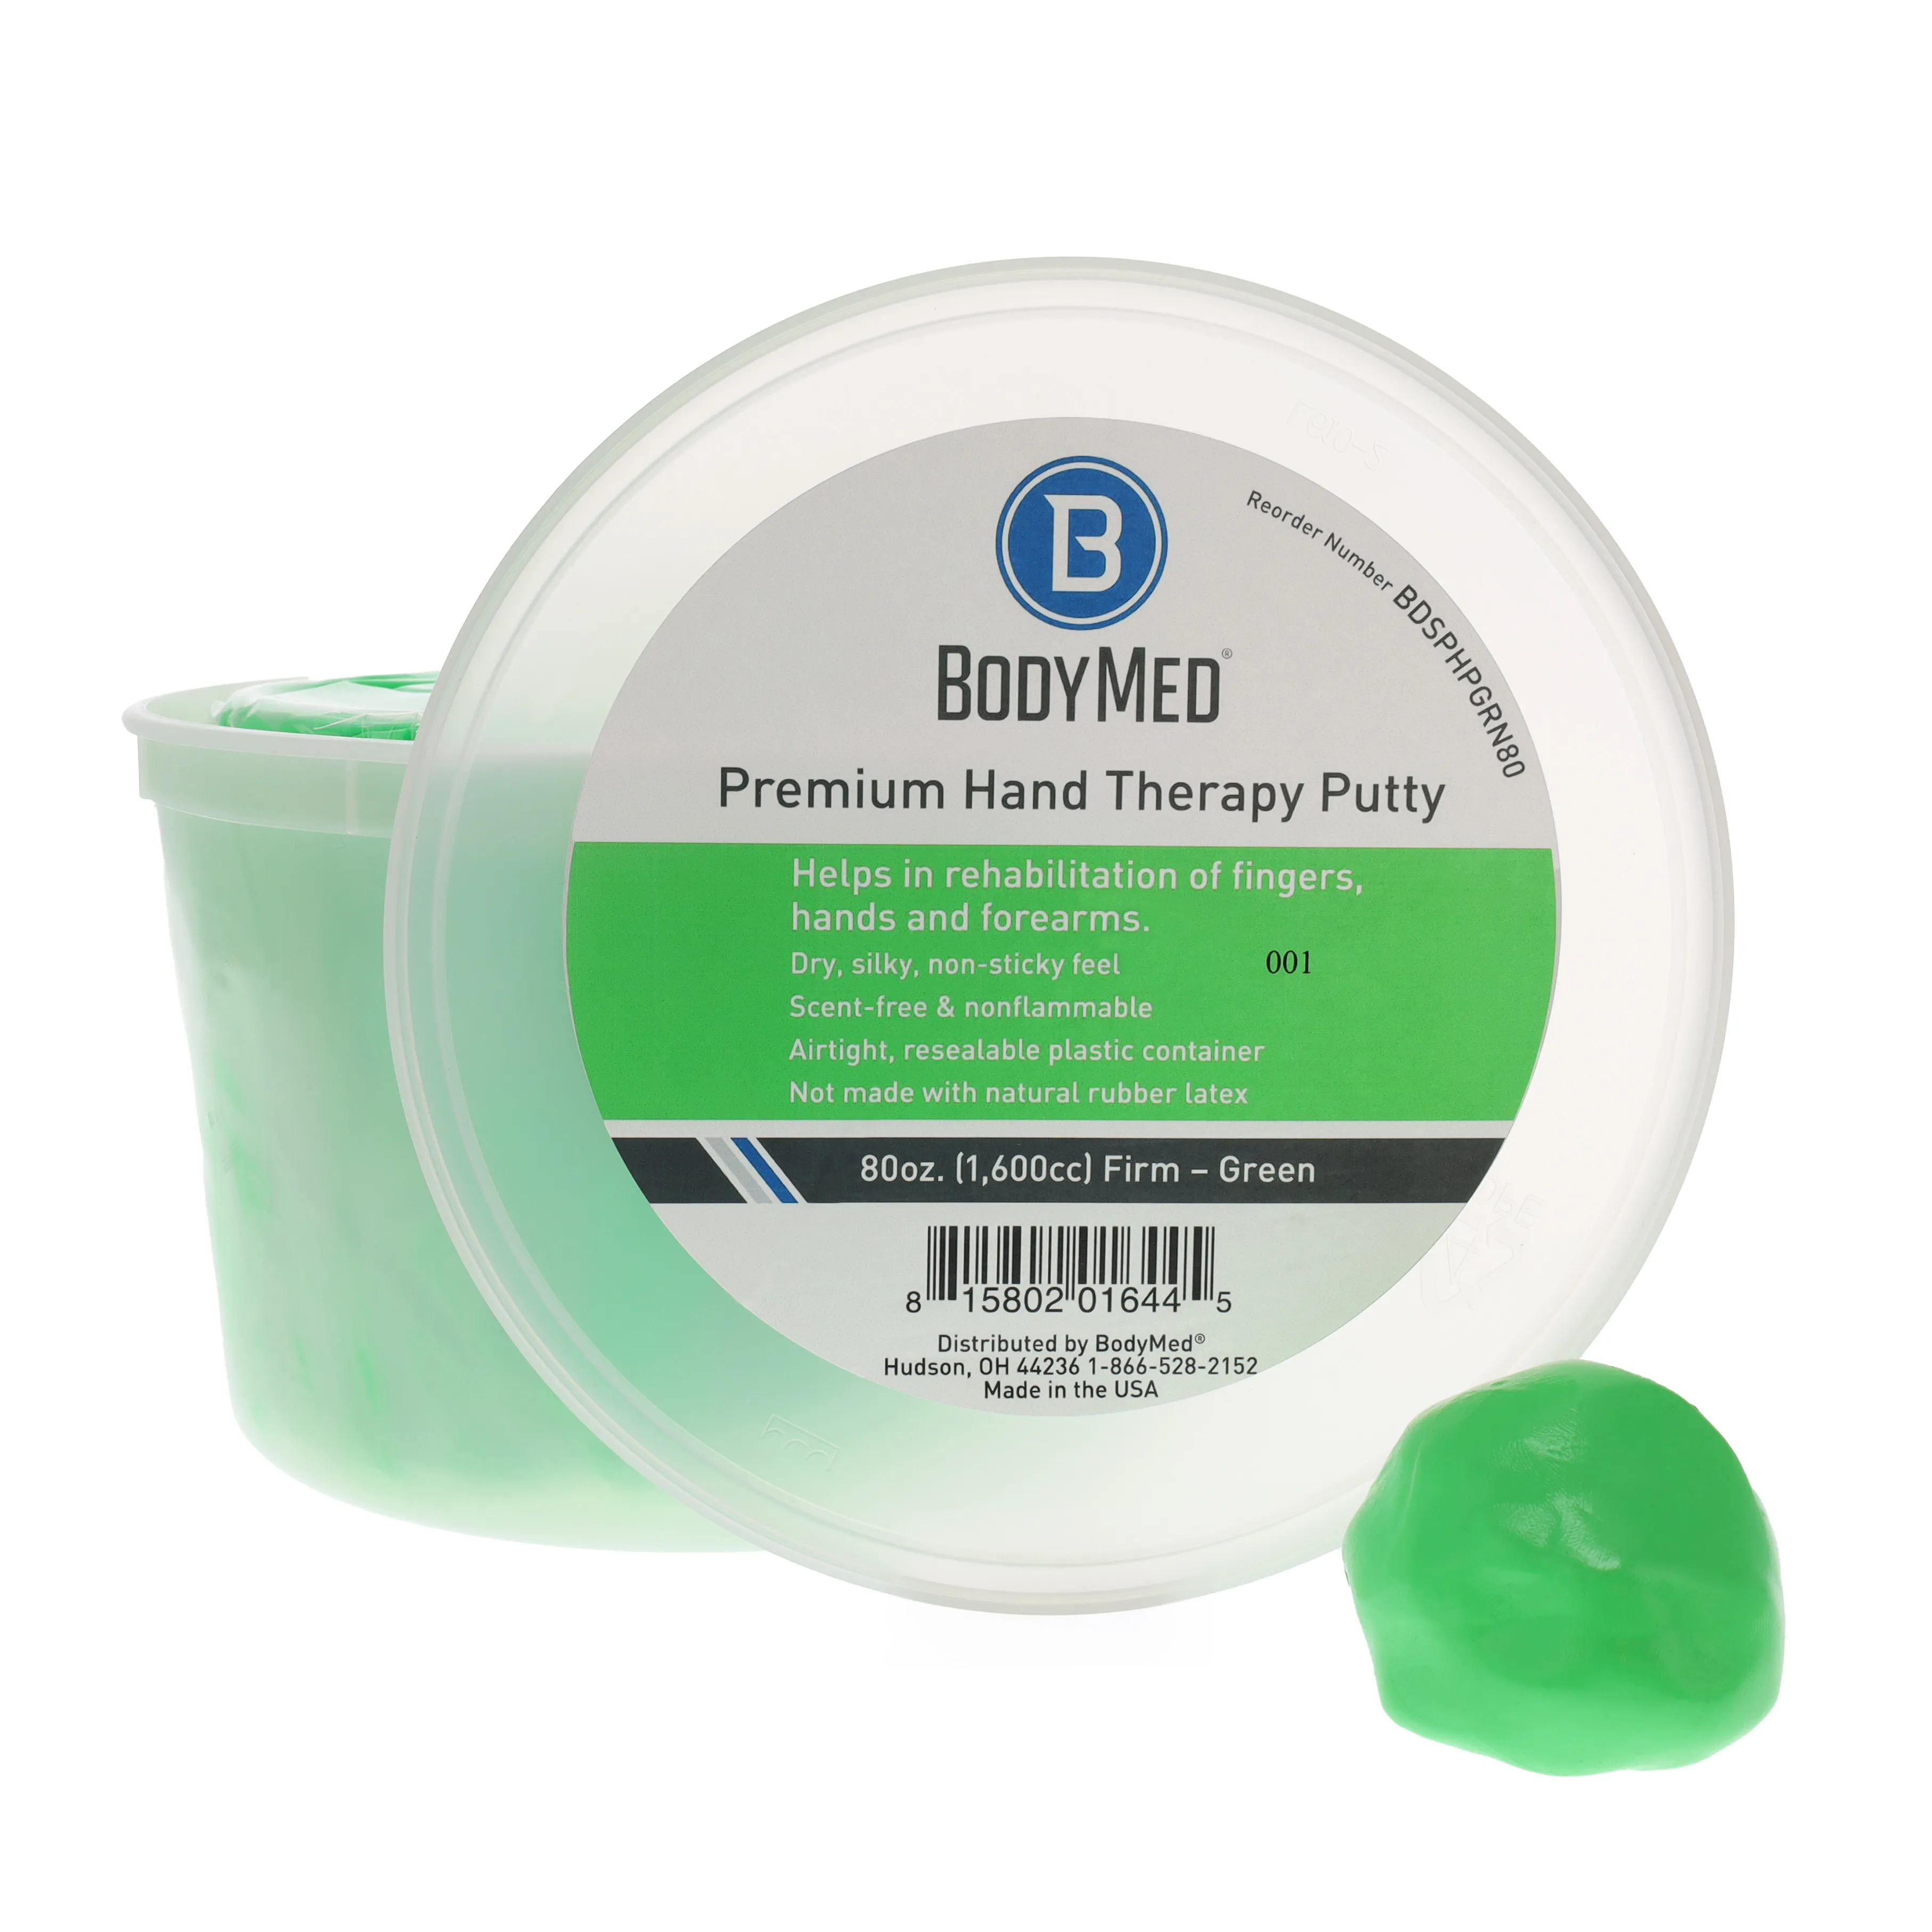 Bodymed - BDSPHPGRN80 - Premium Hand Therapy Putty - Firm